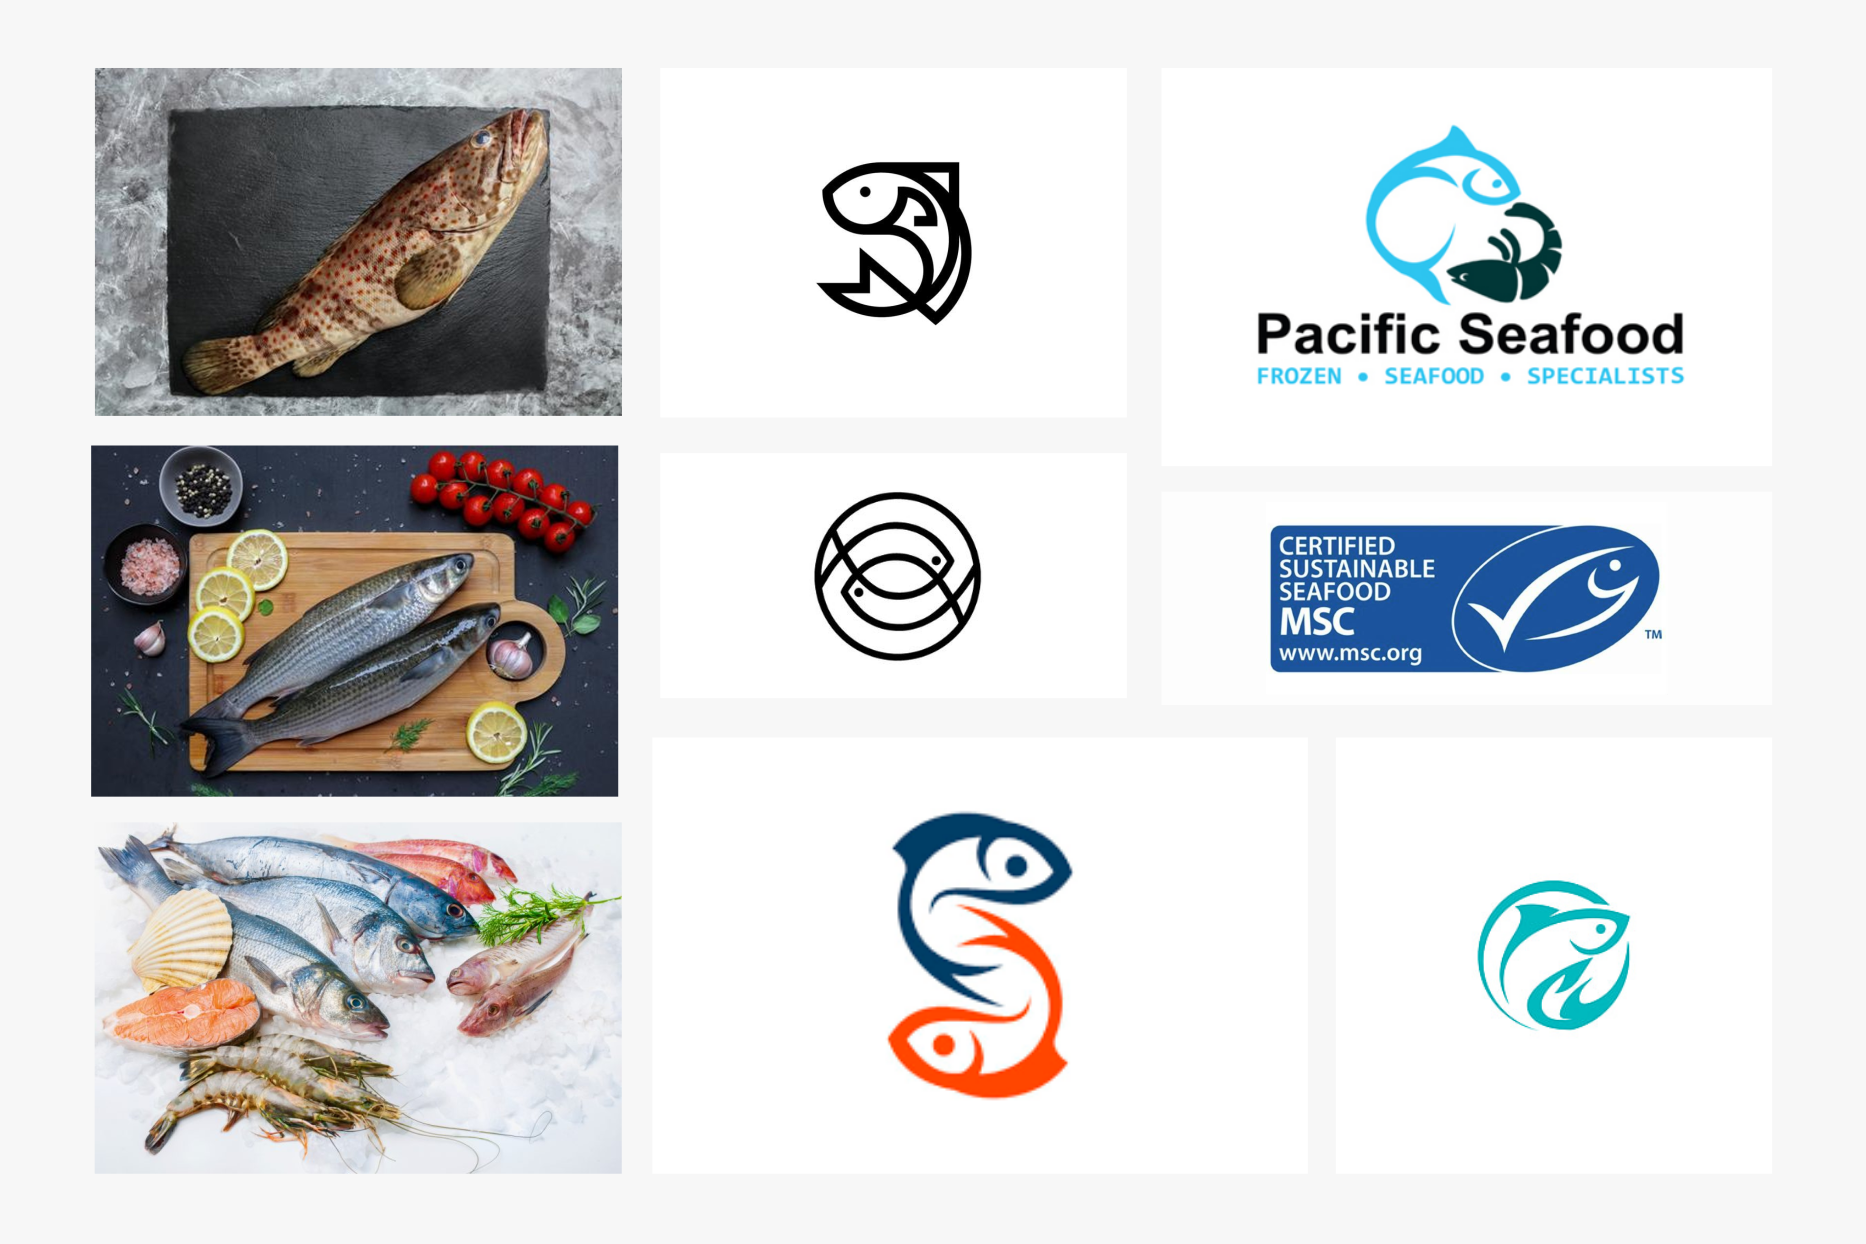 Some of my inspiration for this project with 9s Seafood